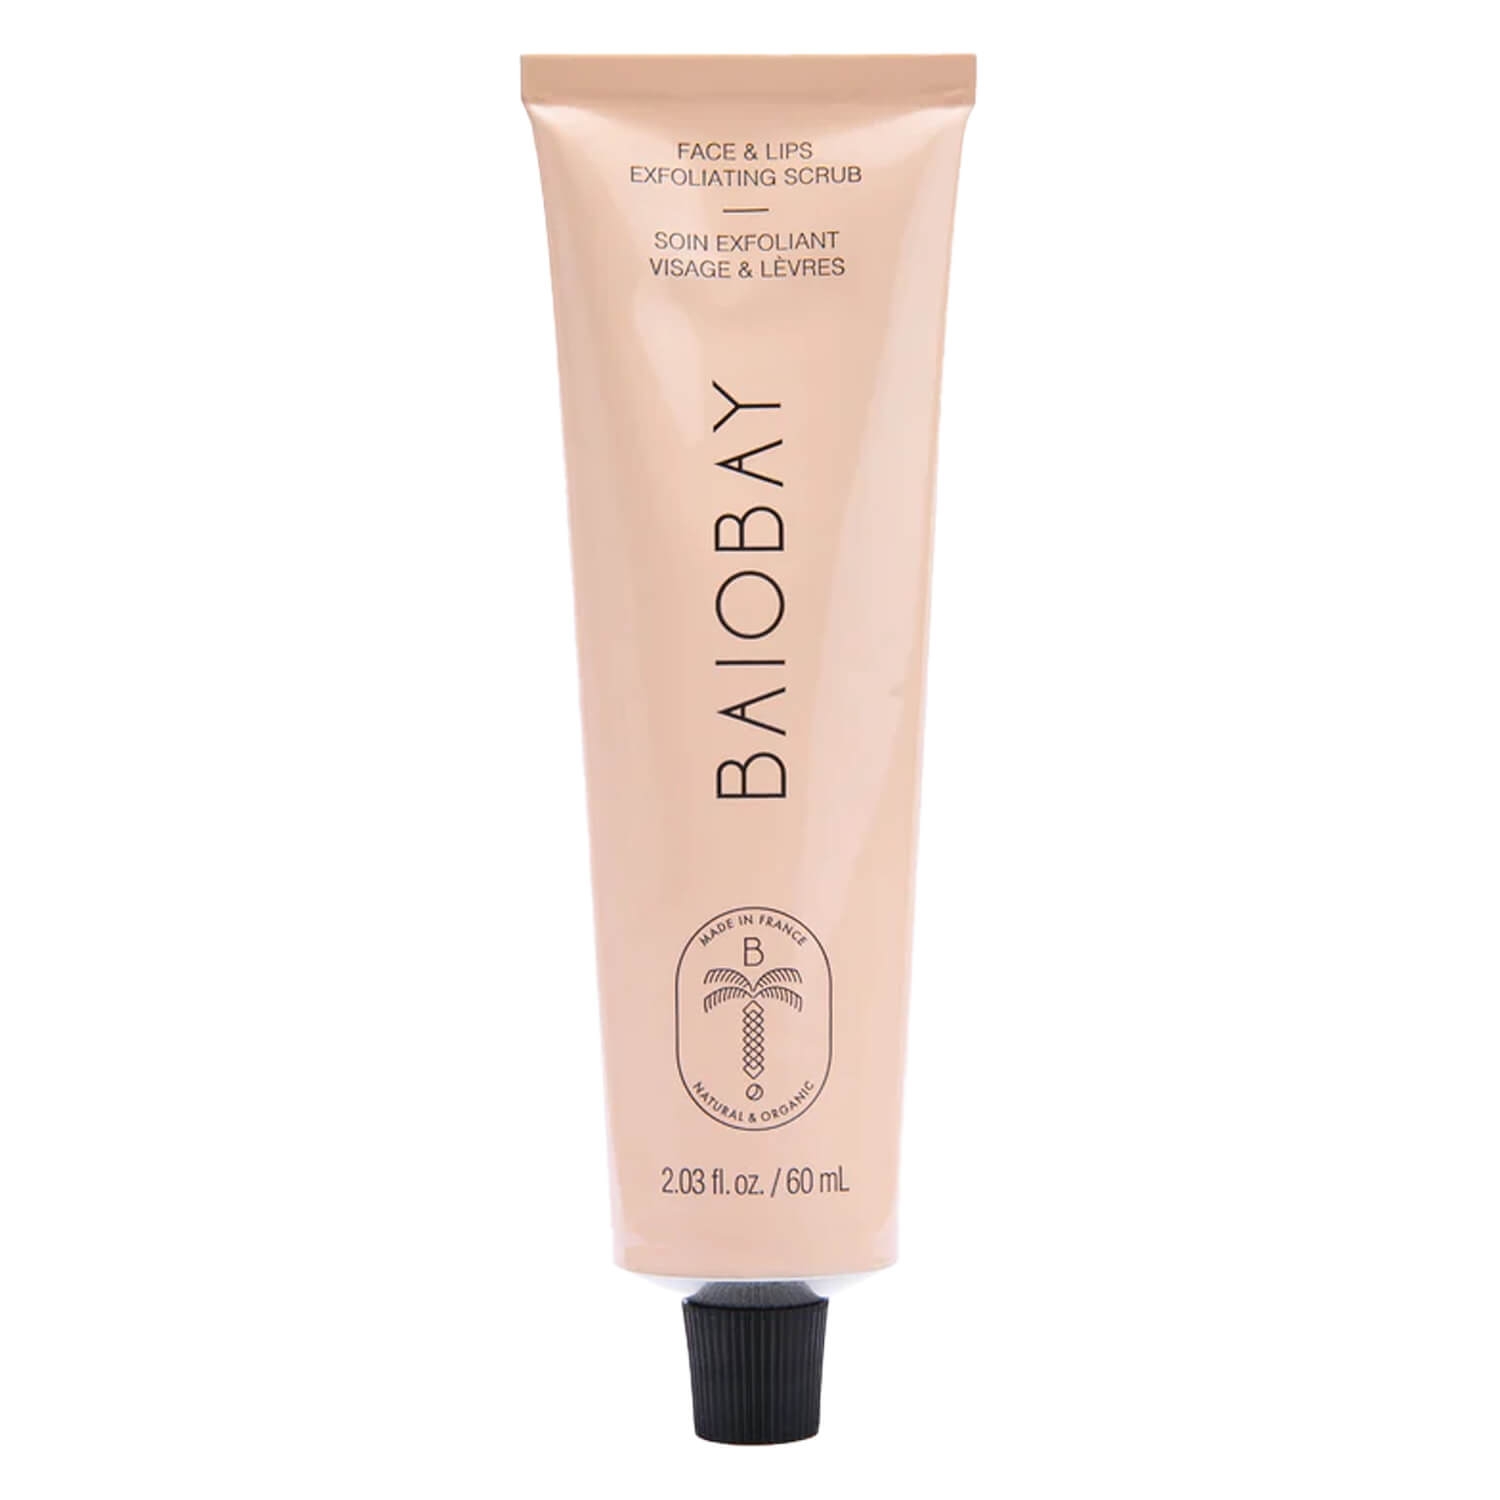 Product image from BAIOBAY - Face & Lips Exfoliating Scrub